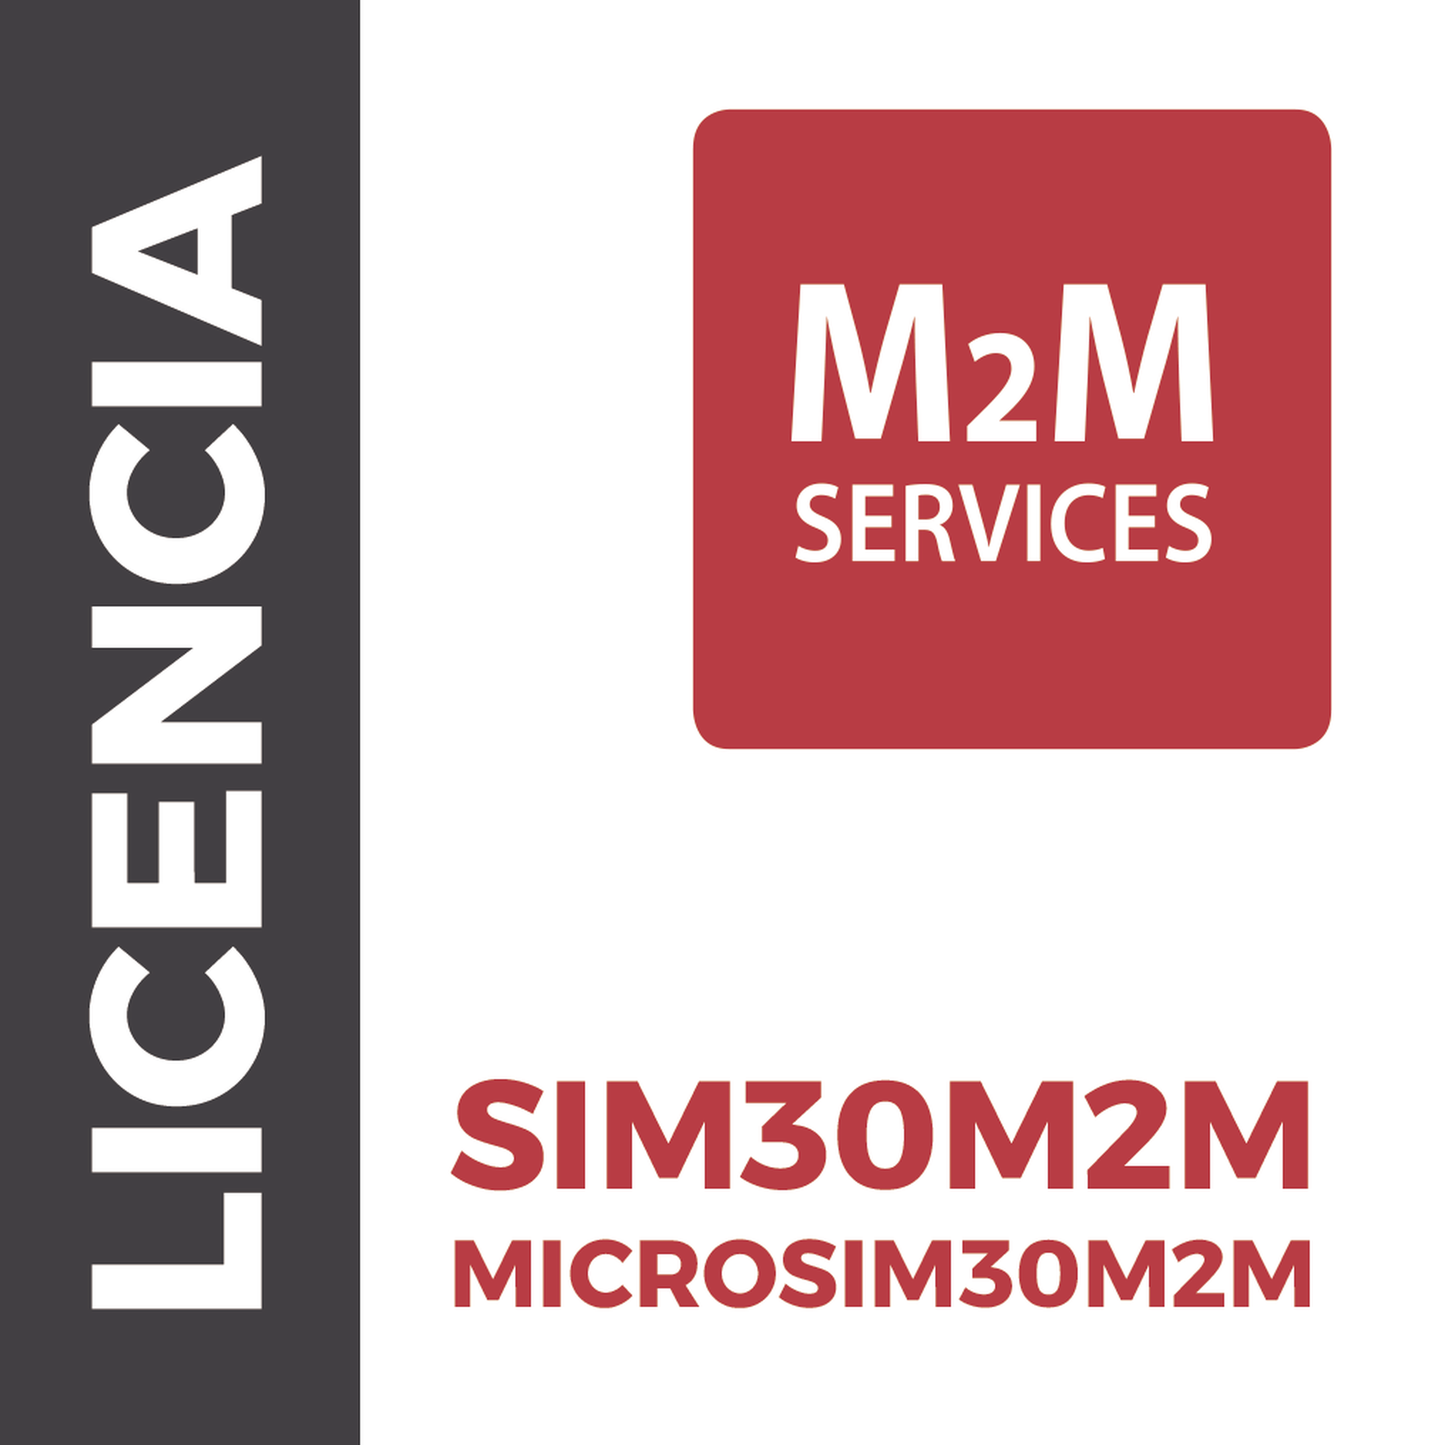 Renewal of Monthly Service of SIM30M2M